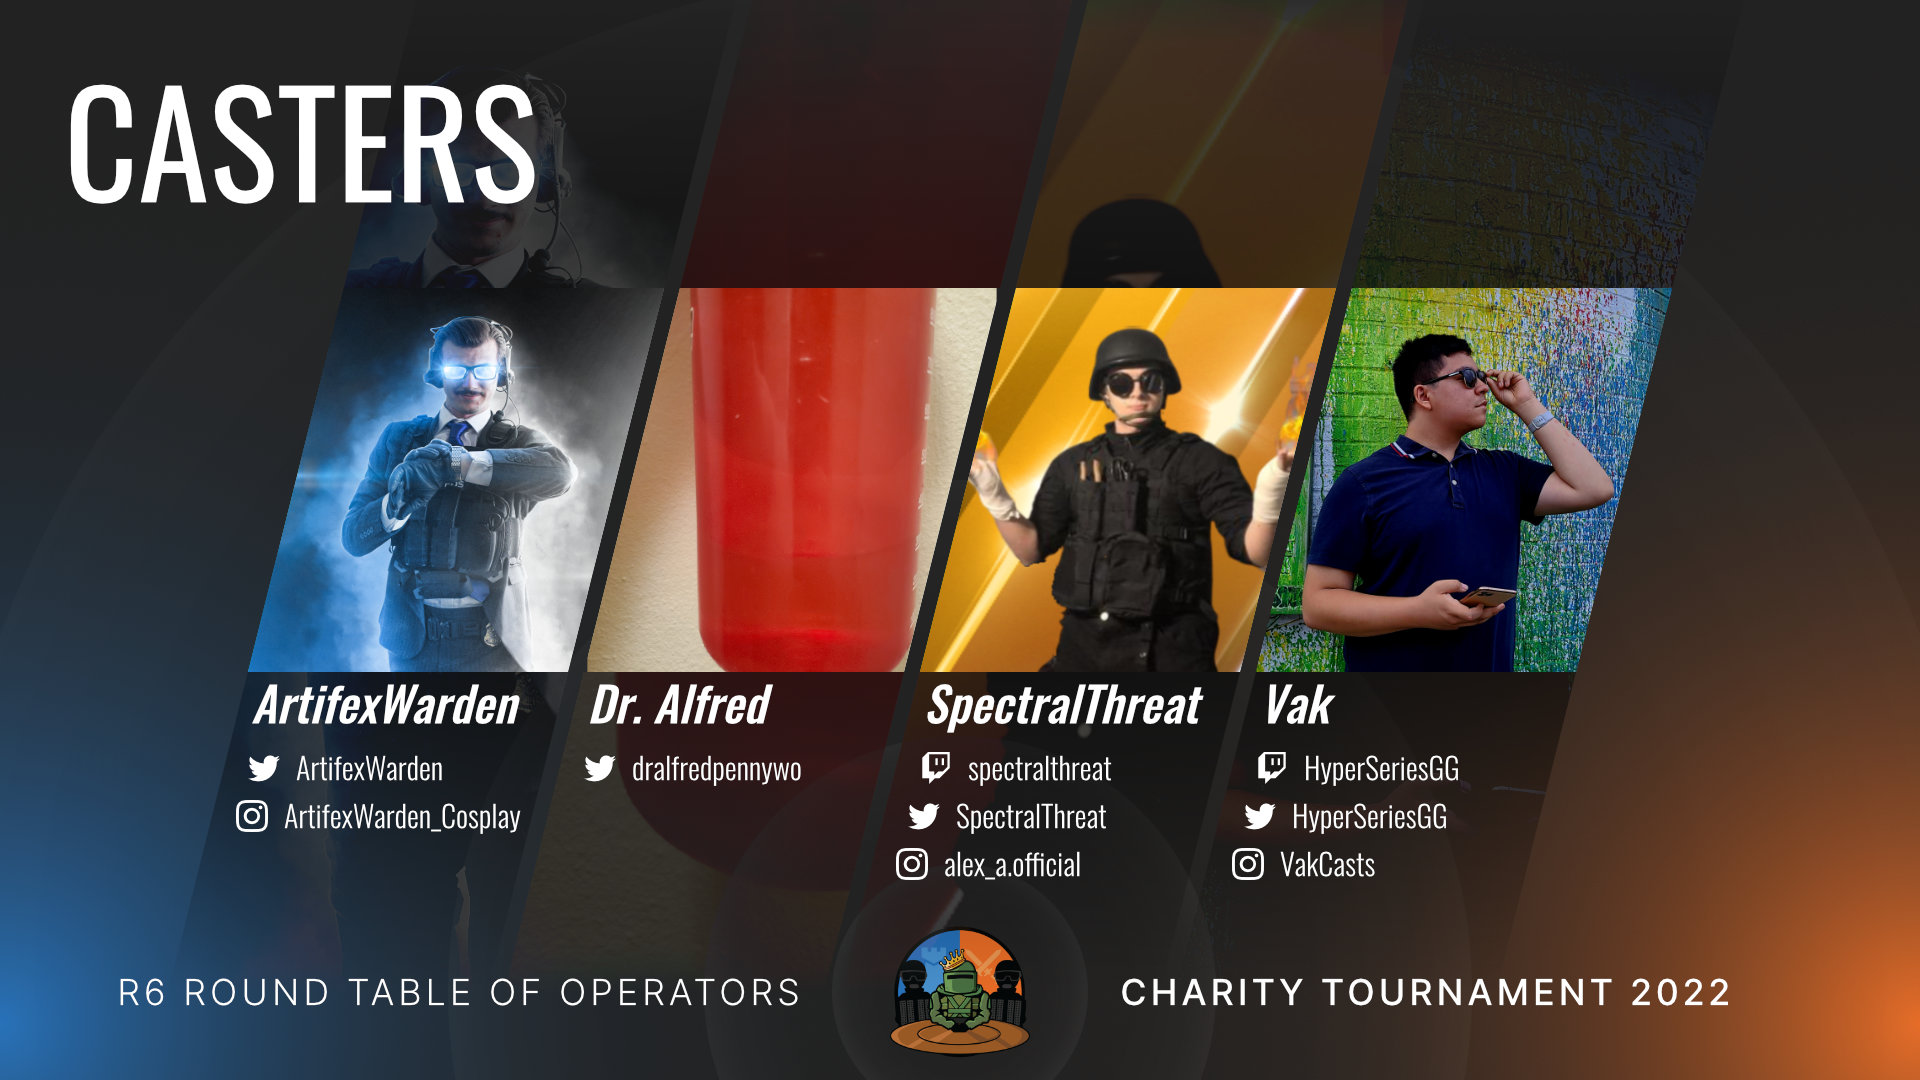 Graphics of the roster of Casters